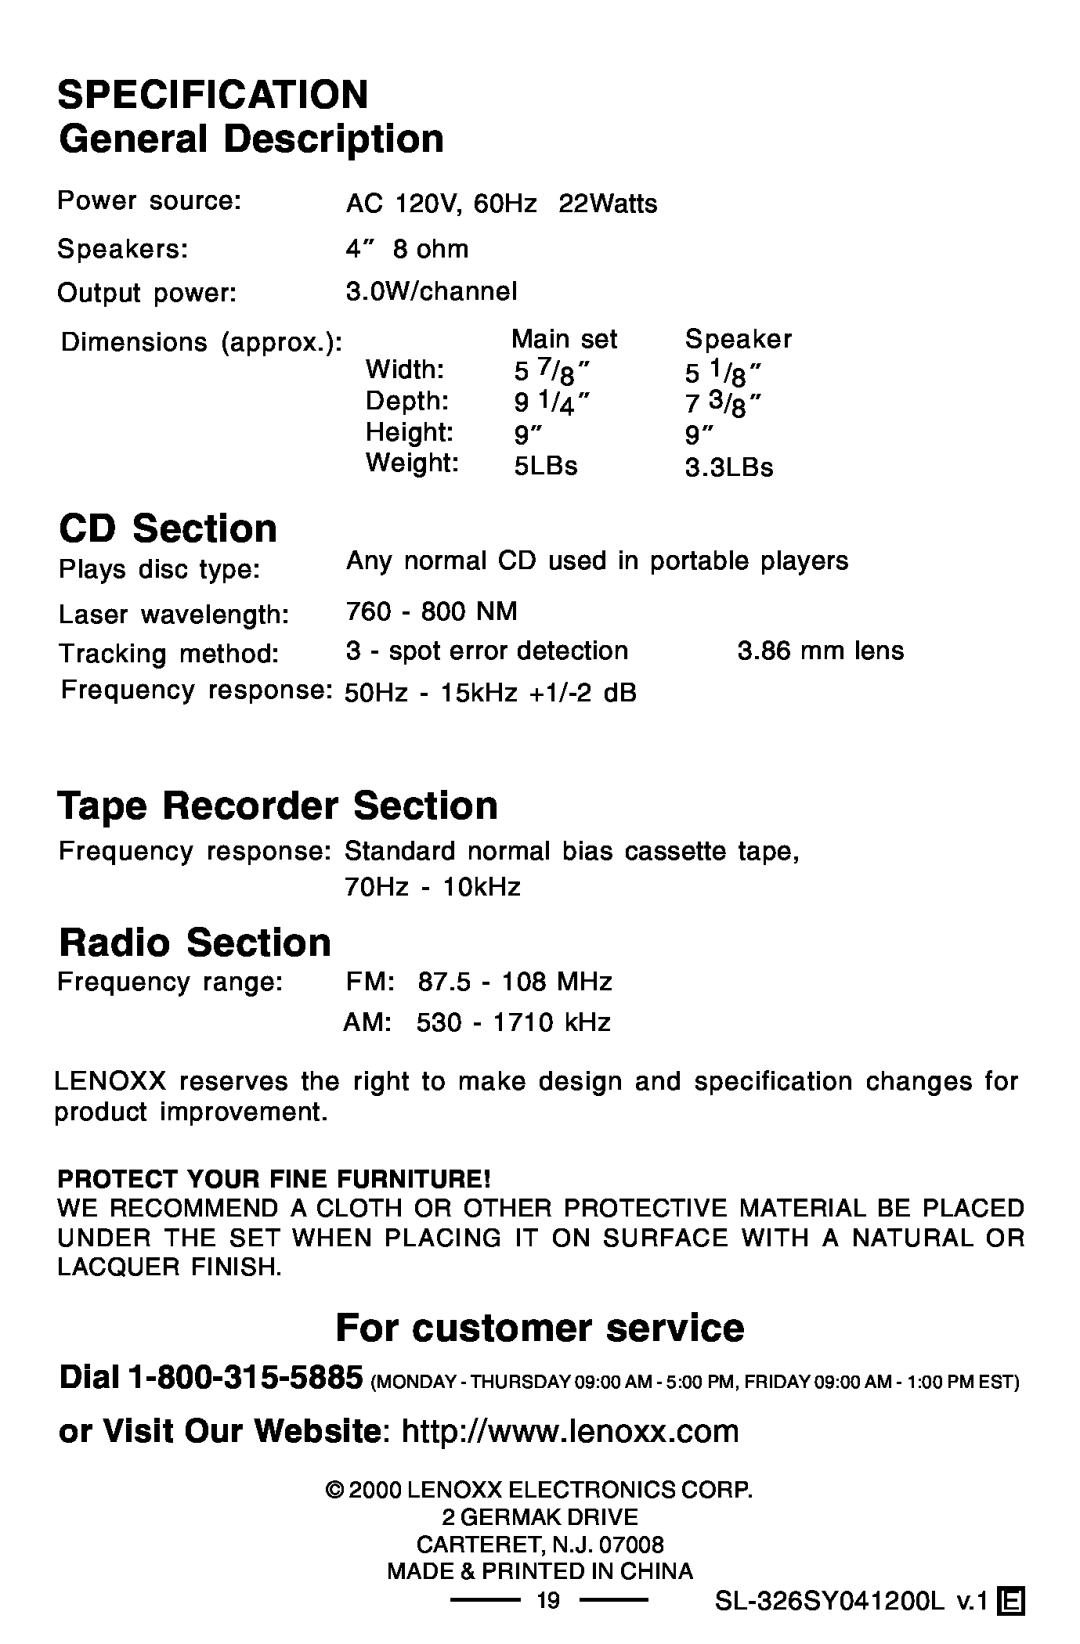 Lenoxx Electronics SL-326 manual SPECIFICATION General Description, CD Section, Tape Recorder Section, Radio Section 